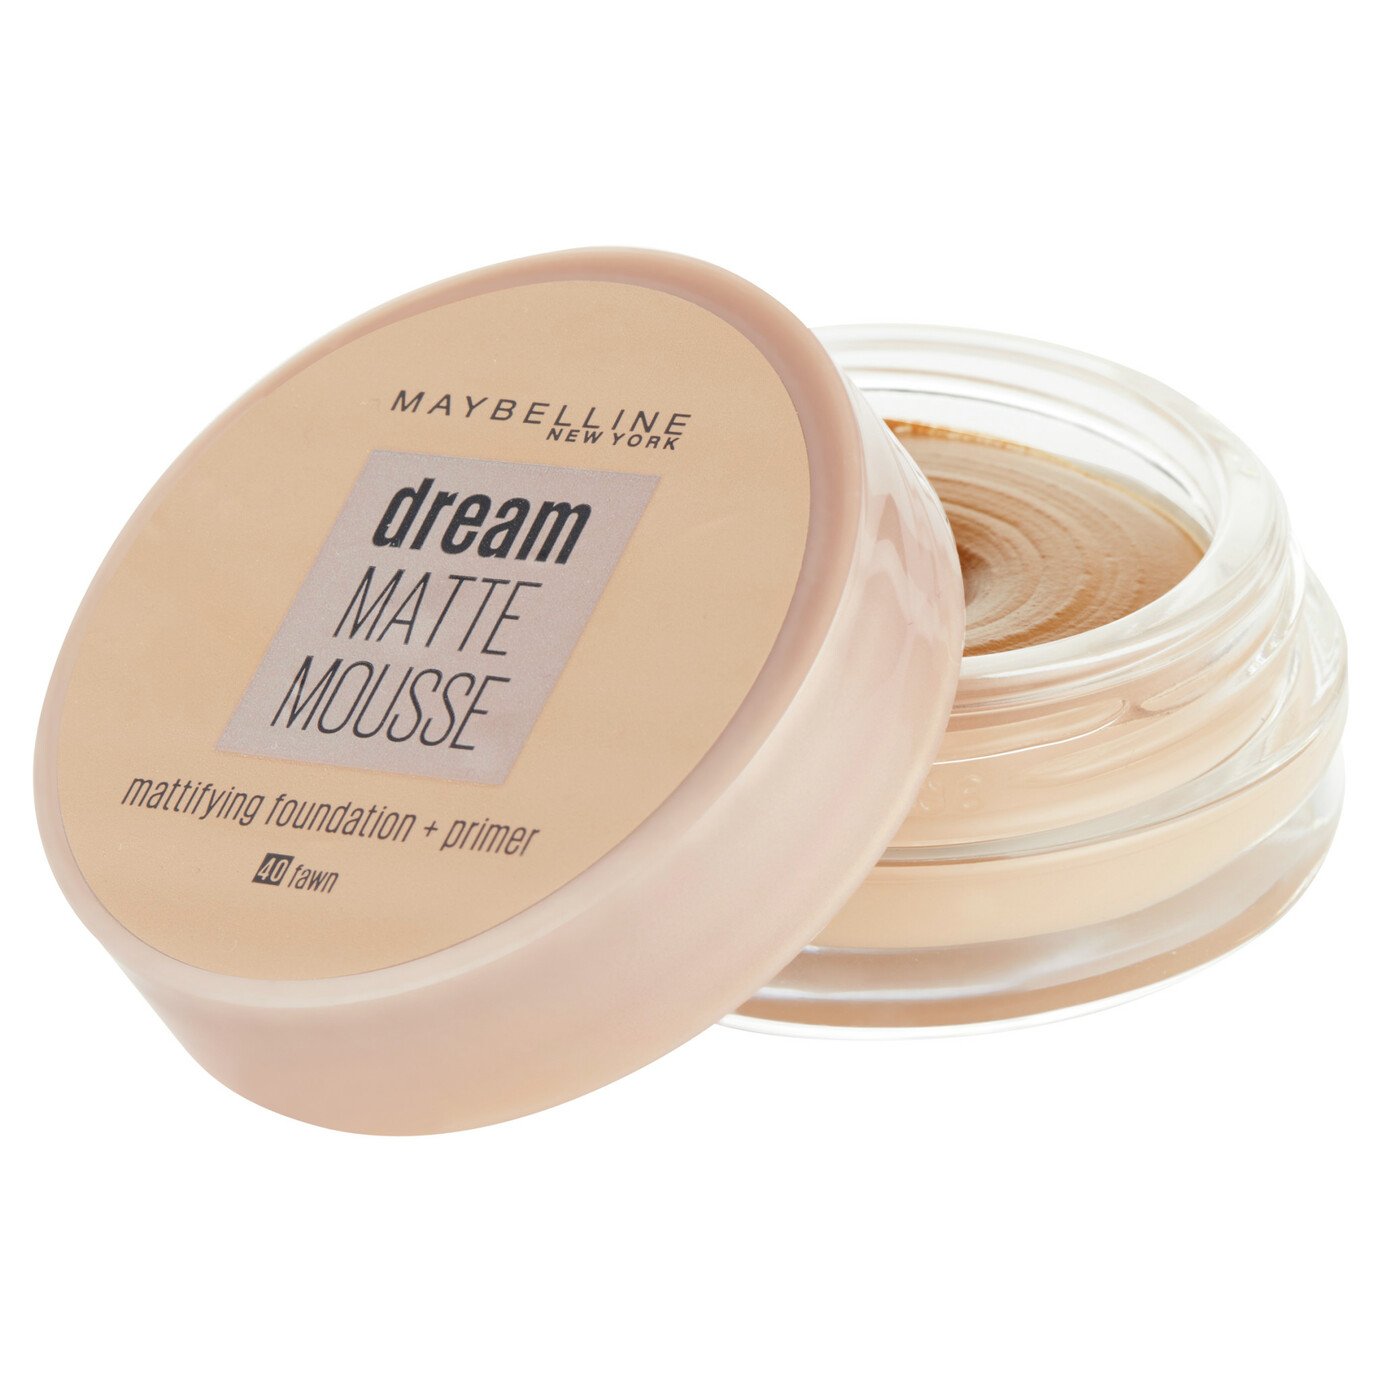 Maybelline Dream Matte Mousse - Fawn 40